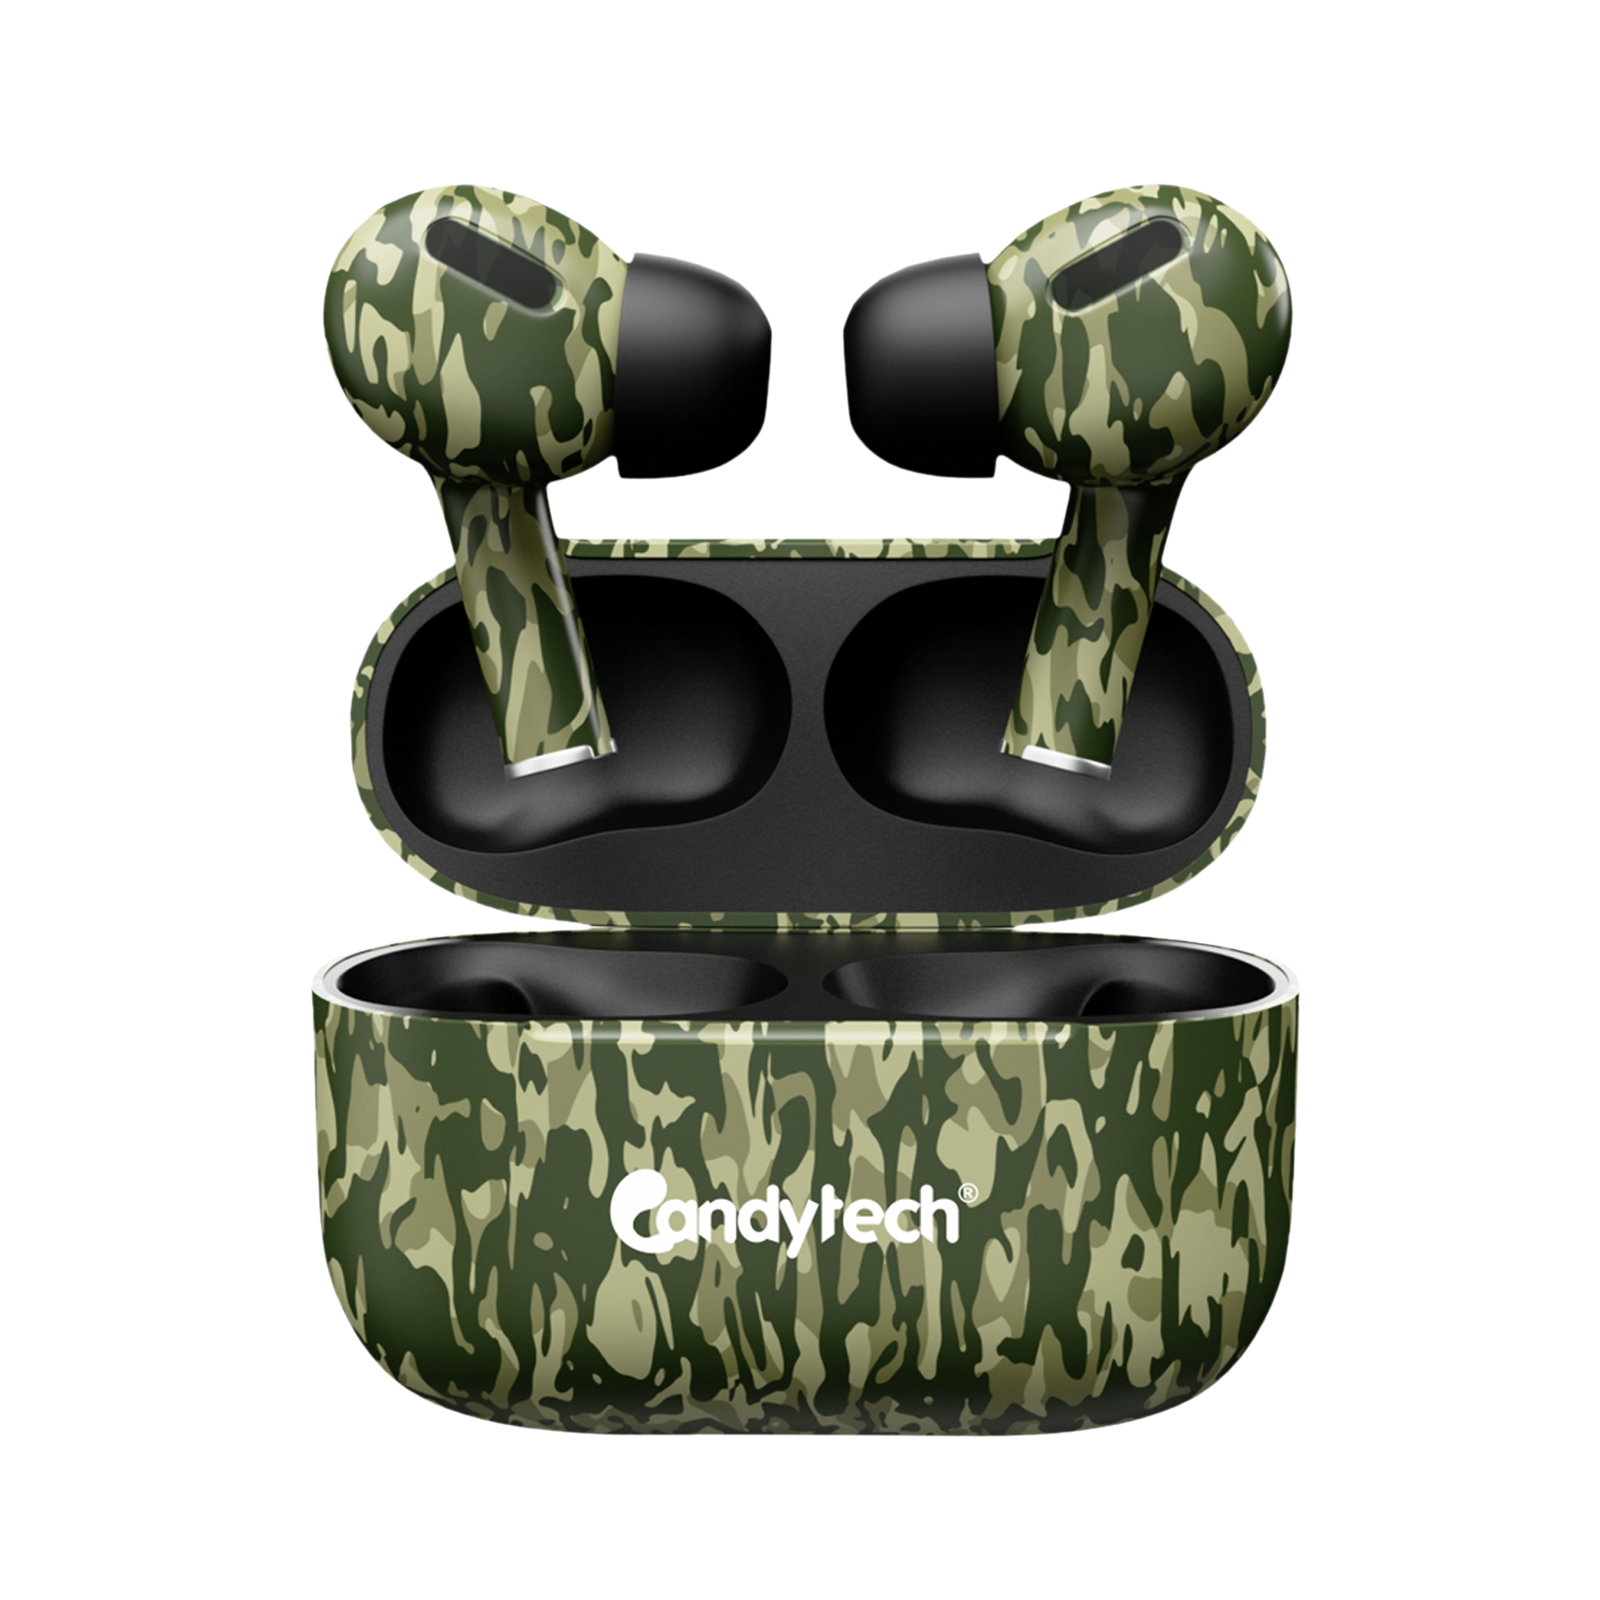 Candytech AirCamo Pro TWS Earbuds with Environmental Noise Cancellation (IPX4, Green)